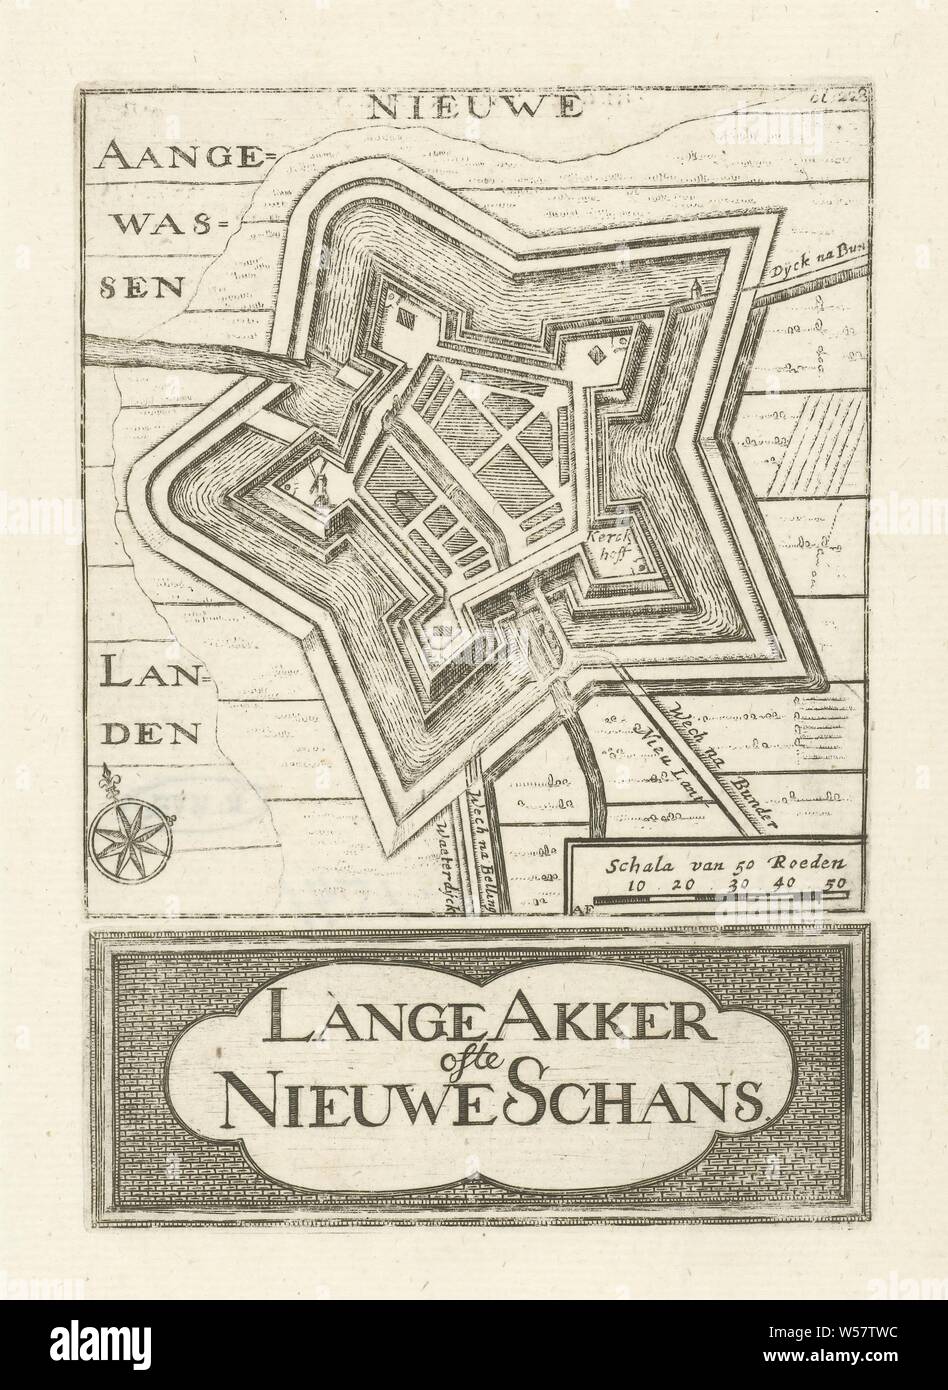 Map of Nieuweschans Lange Akker of the Nieuwe Schans (title on object), Two prints on one sheet: At the top a print with a representation of a map of Nieuweschans and below a print with the title in a cartouche. In the upper print at the bottom right a scale and top right: bl. 228, maps, atlases, Nieuweschans, Hendrik Hofsnider (mentioned on object), Groningen, 1743, paper, etching, h 101 mm × w 97 mm × h 38 mm × w 97 mm Stock Photo